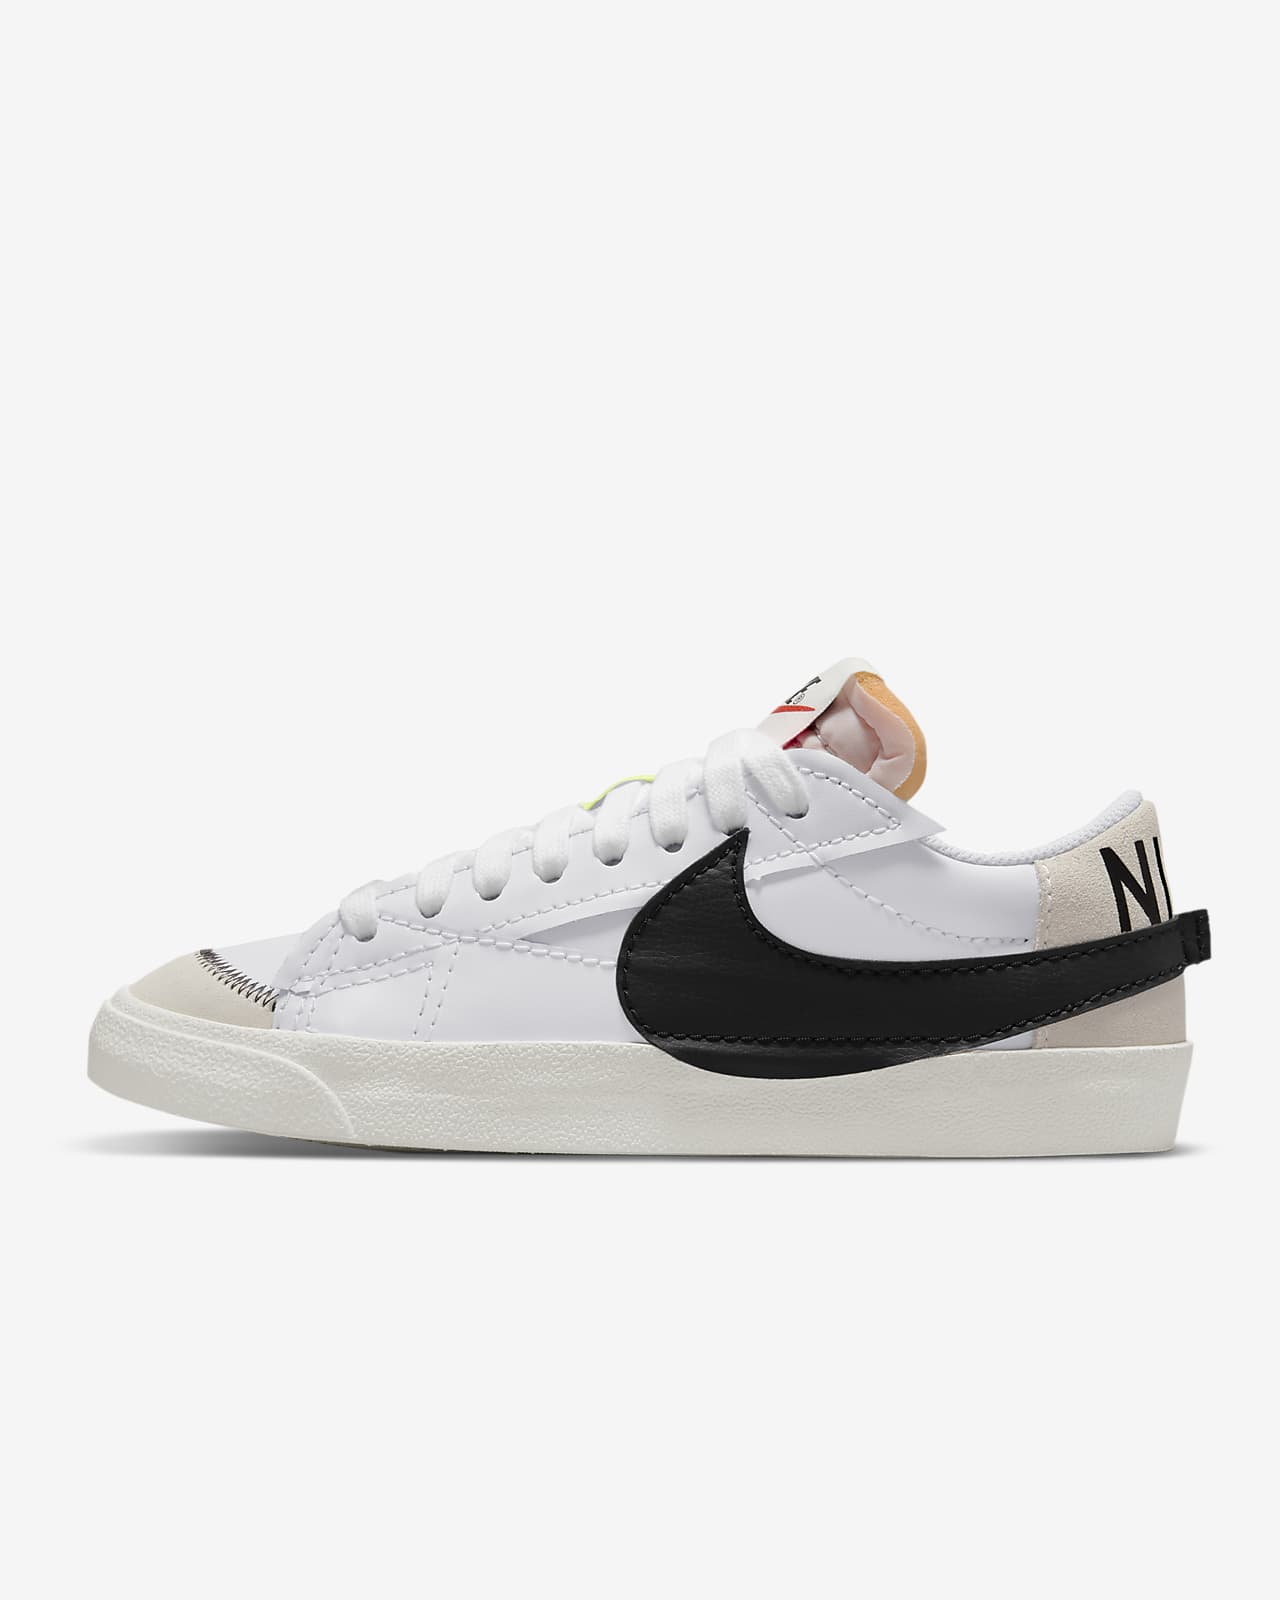 Chaussures Nike Blazer Low '77 Jumbo pour Homme